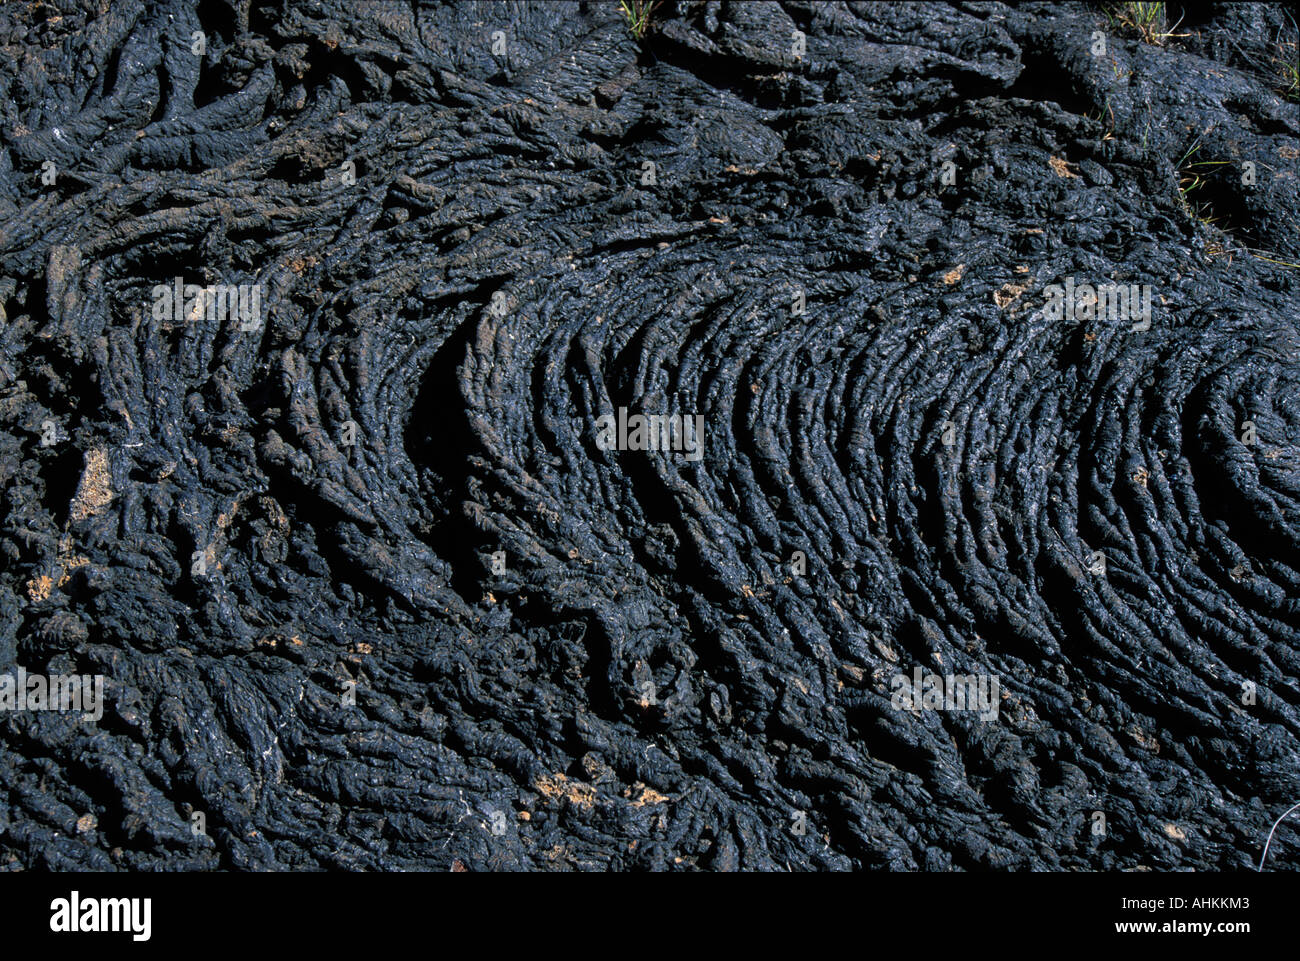 Ecuador Galapagos Islands Close up view of pahoehoe lava flow in barren landscape at Punta Moreno on Isabela Island Stock Photo